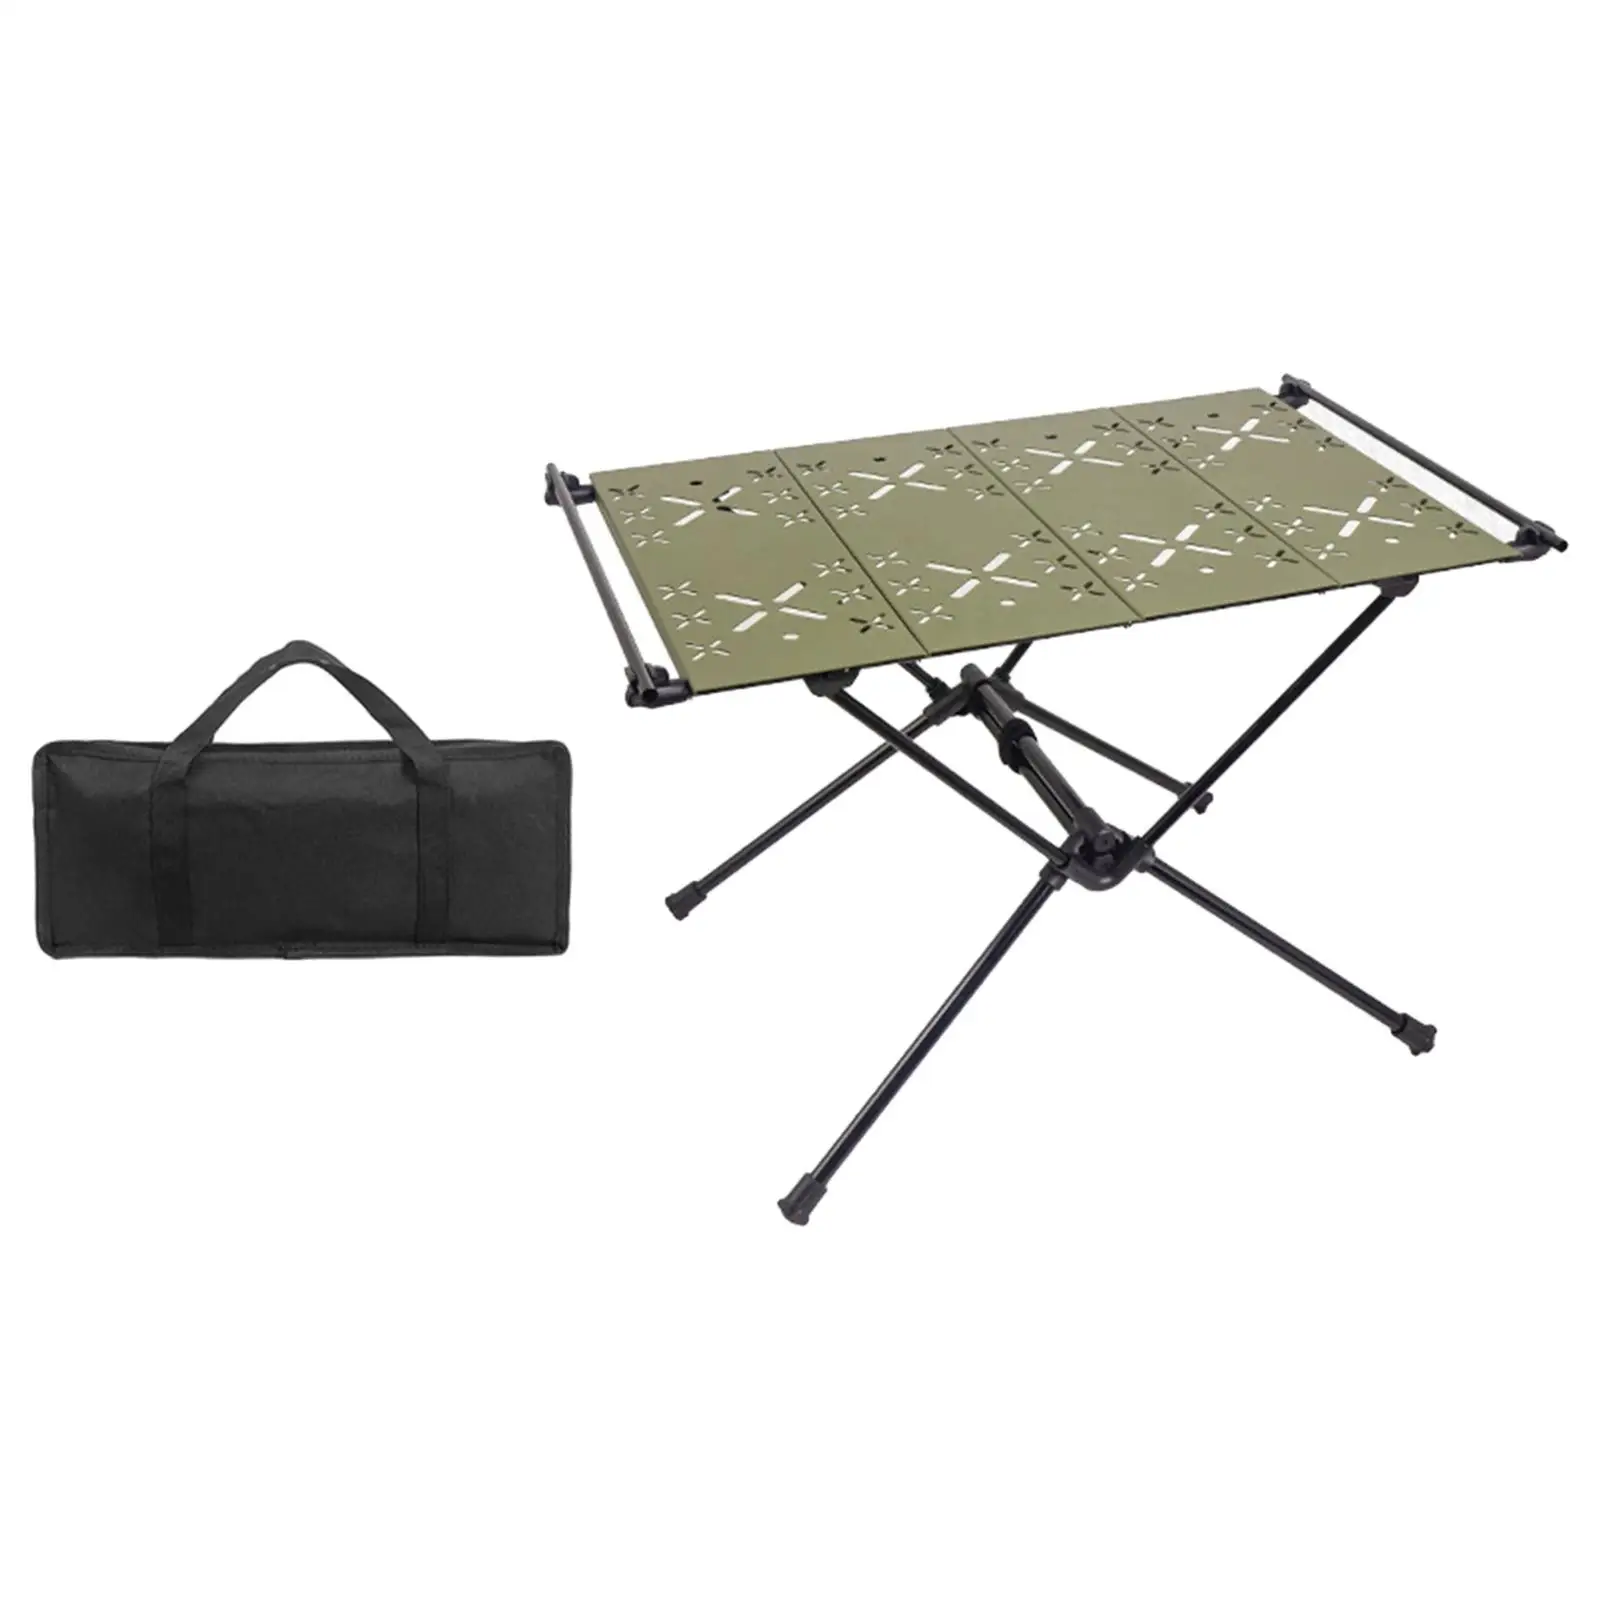 Foldable Camping Table with Storage Bag Ultralight Desk Outdoor Foldable Table for Garden Backyard Travel Fishing Yard